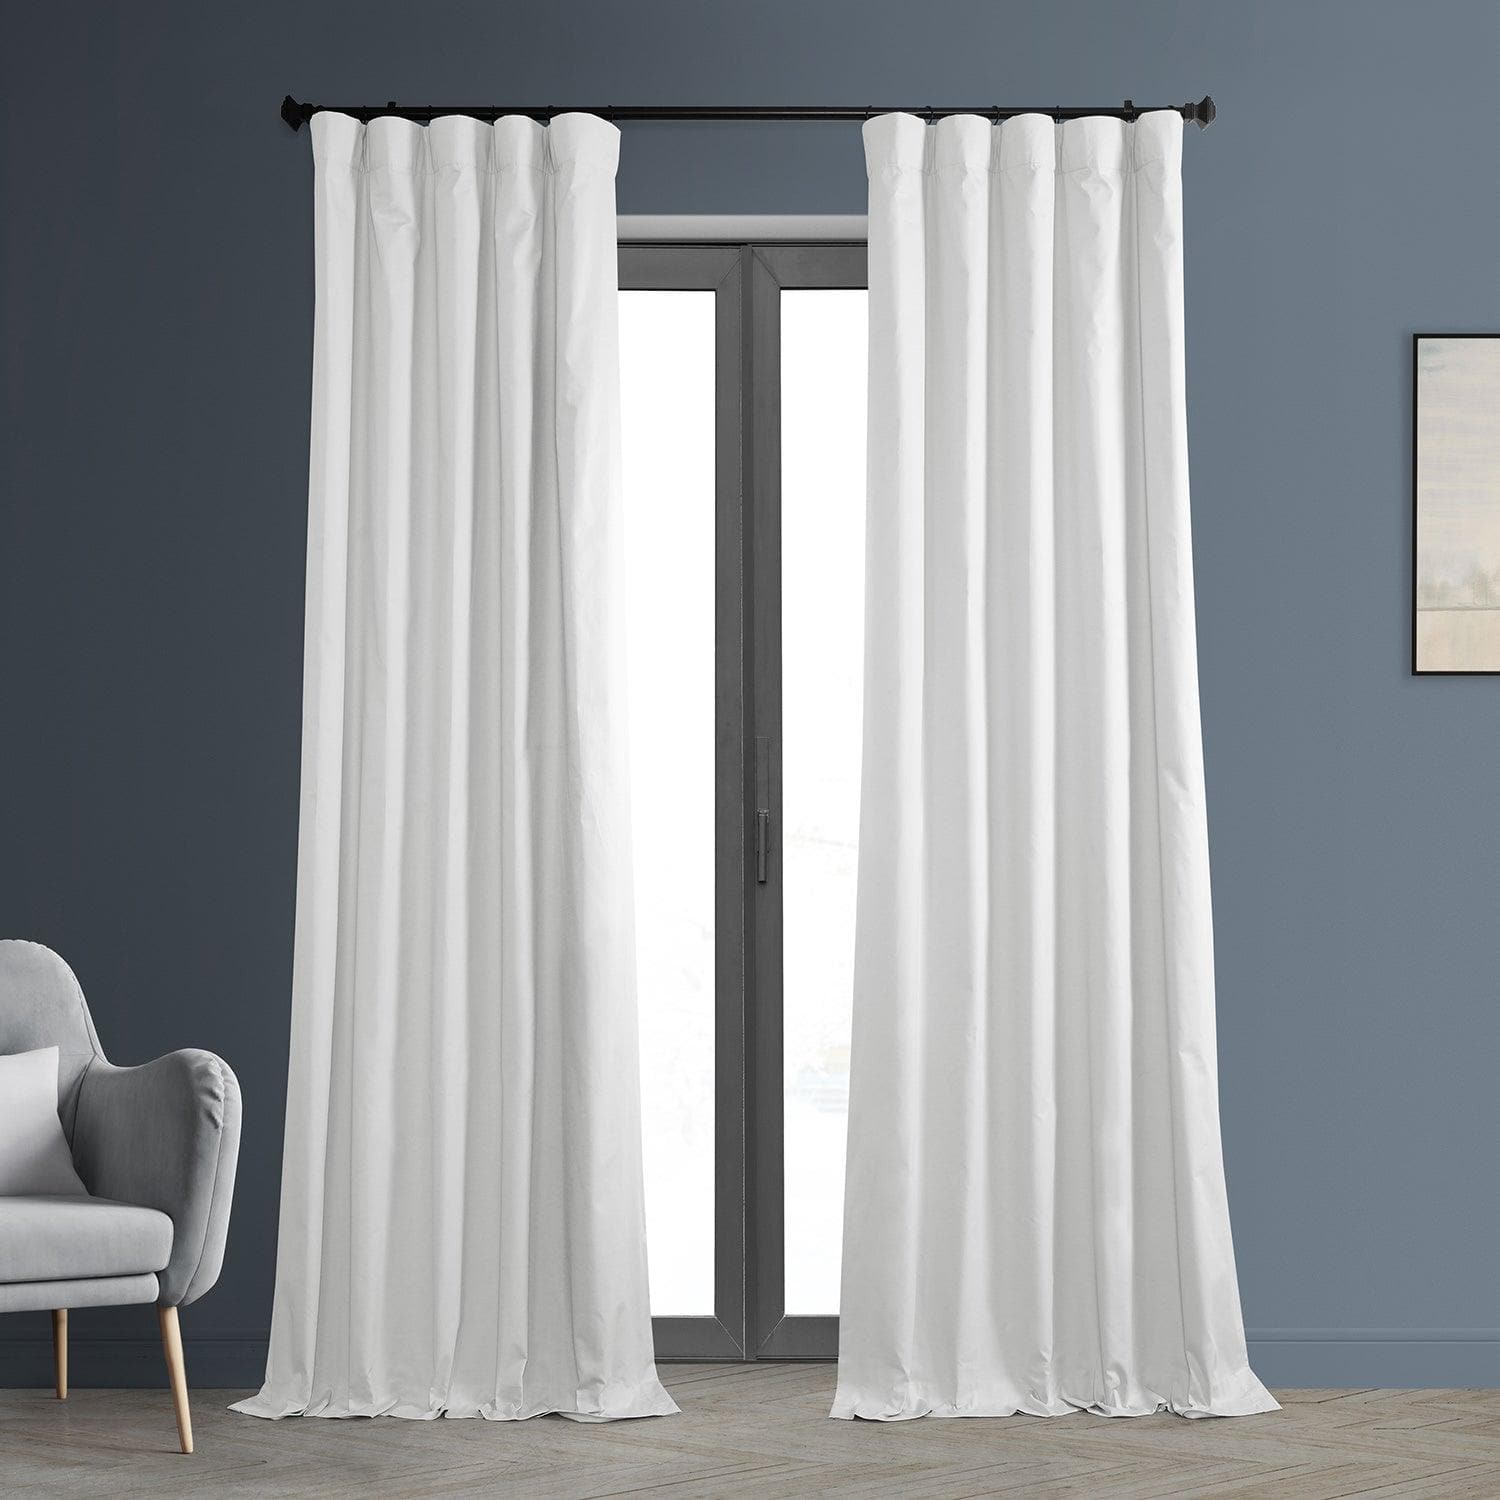 Solid Cotton Hotel Blackout Curtain